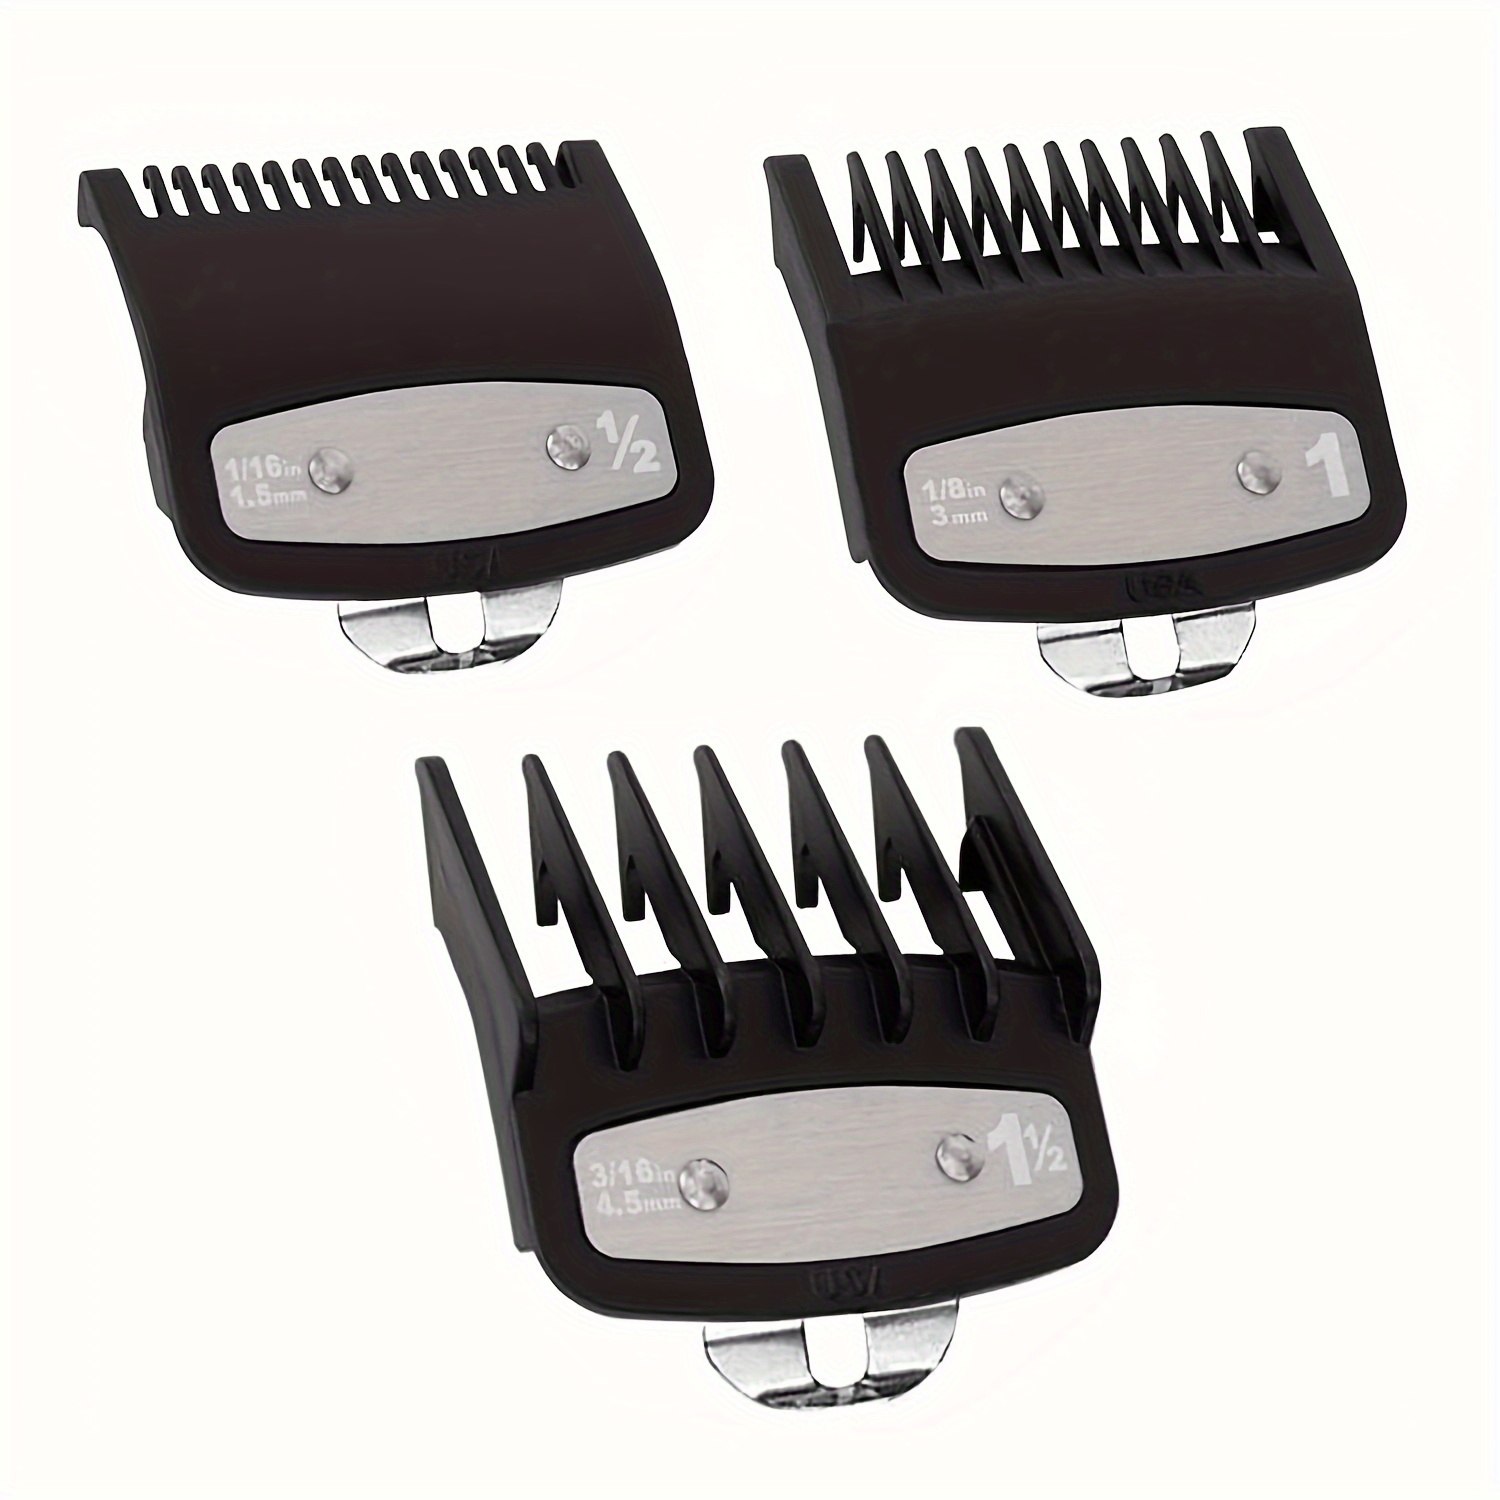 

3pcs/set Hair Clipper Limit Combs, Universal Fit Guide Combs, Easy To Install, Durable Barber Replacement Accessories For Multiple Hairstyles